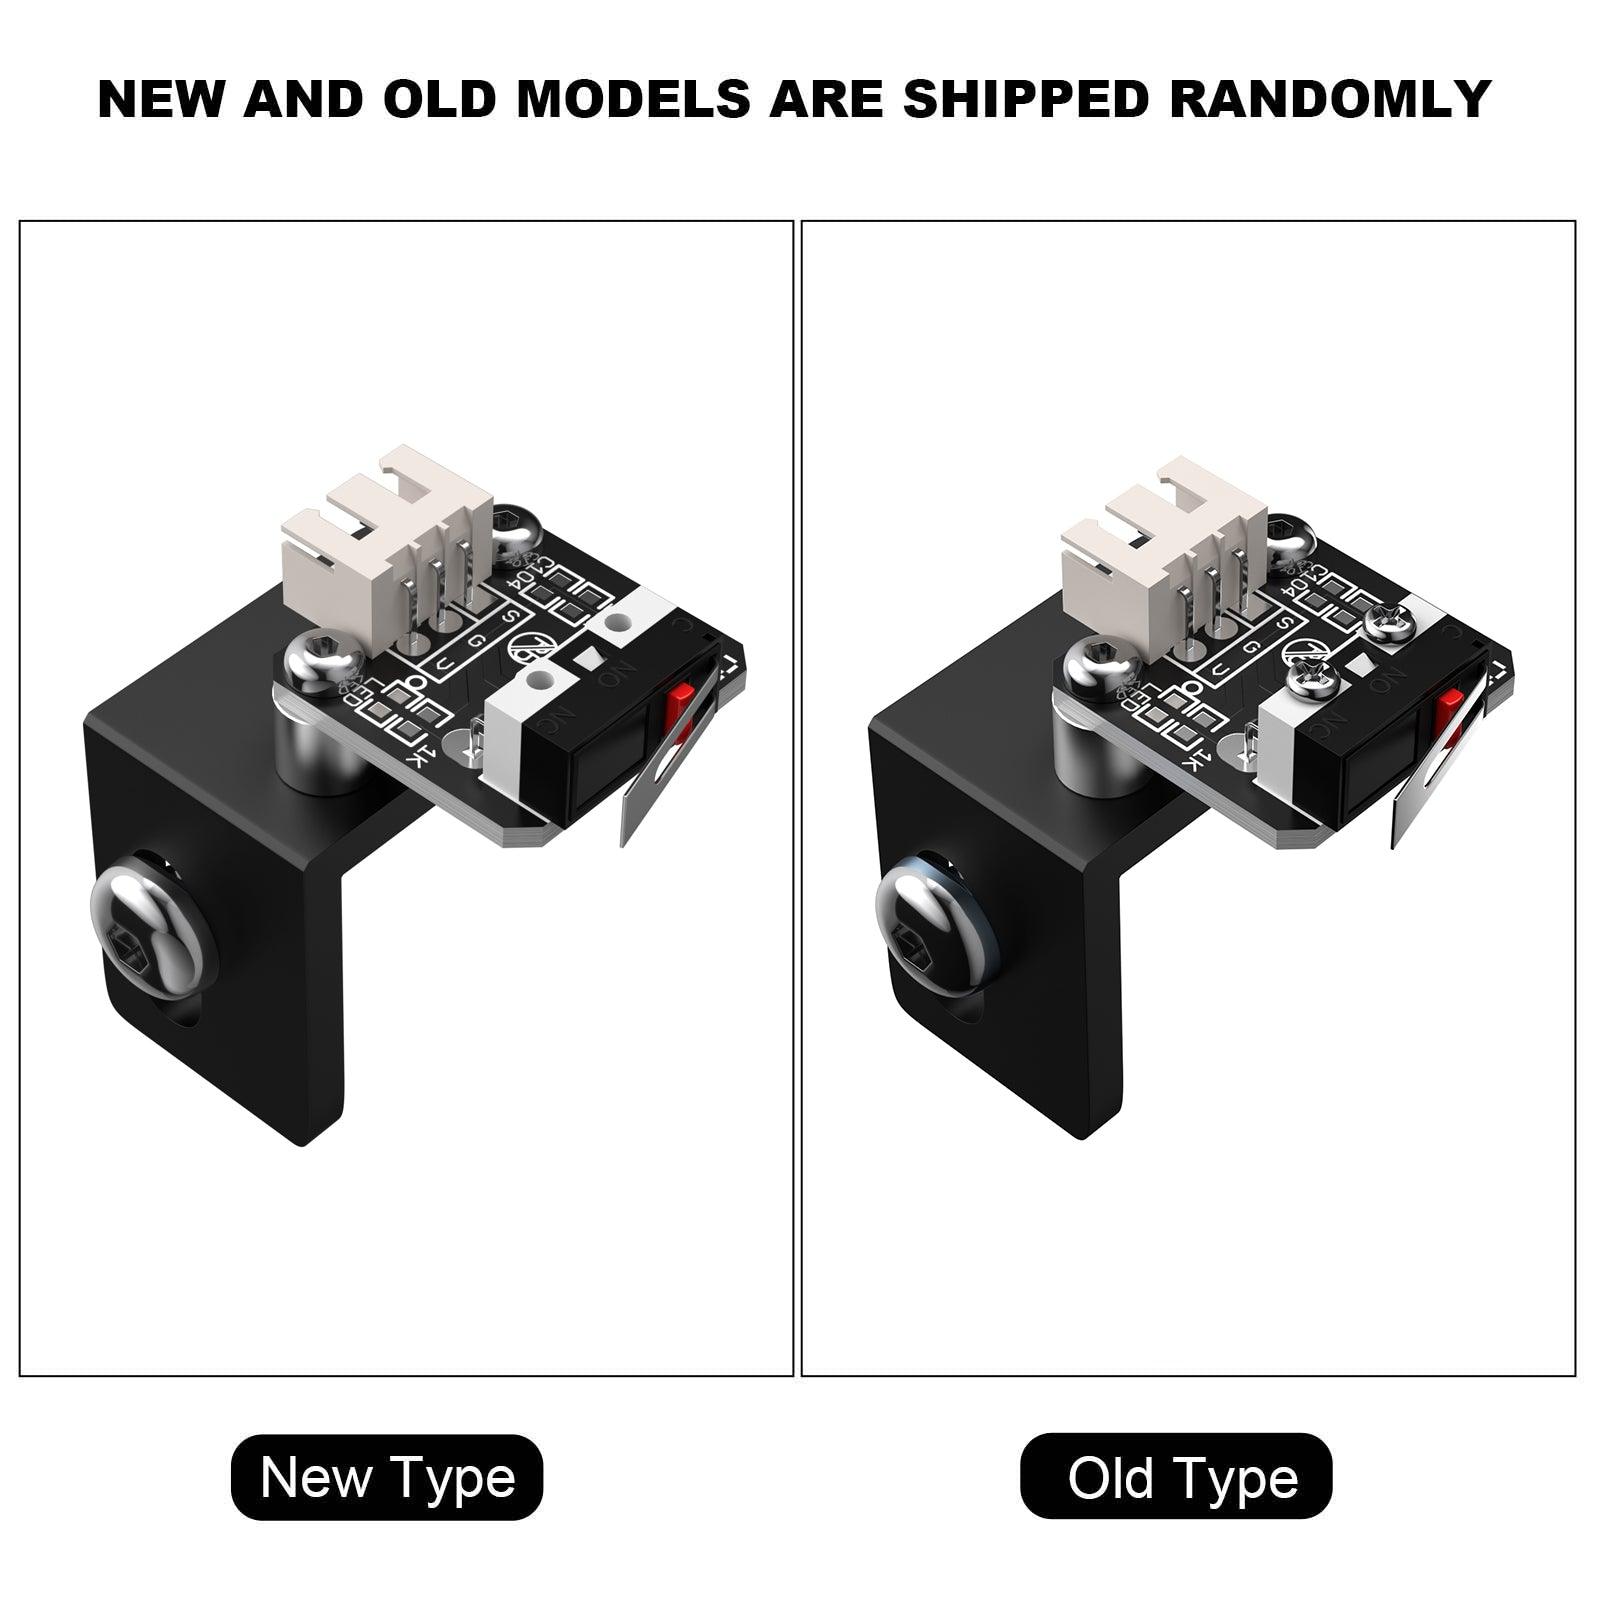 SCULPFUN S9/S10 Laser Engraving Machine Standard Limit Switch Open Homing Positioning Function - CREATORALLY